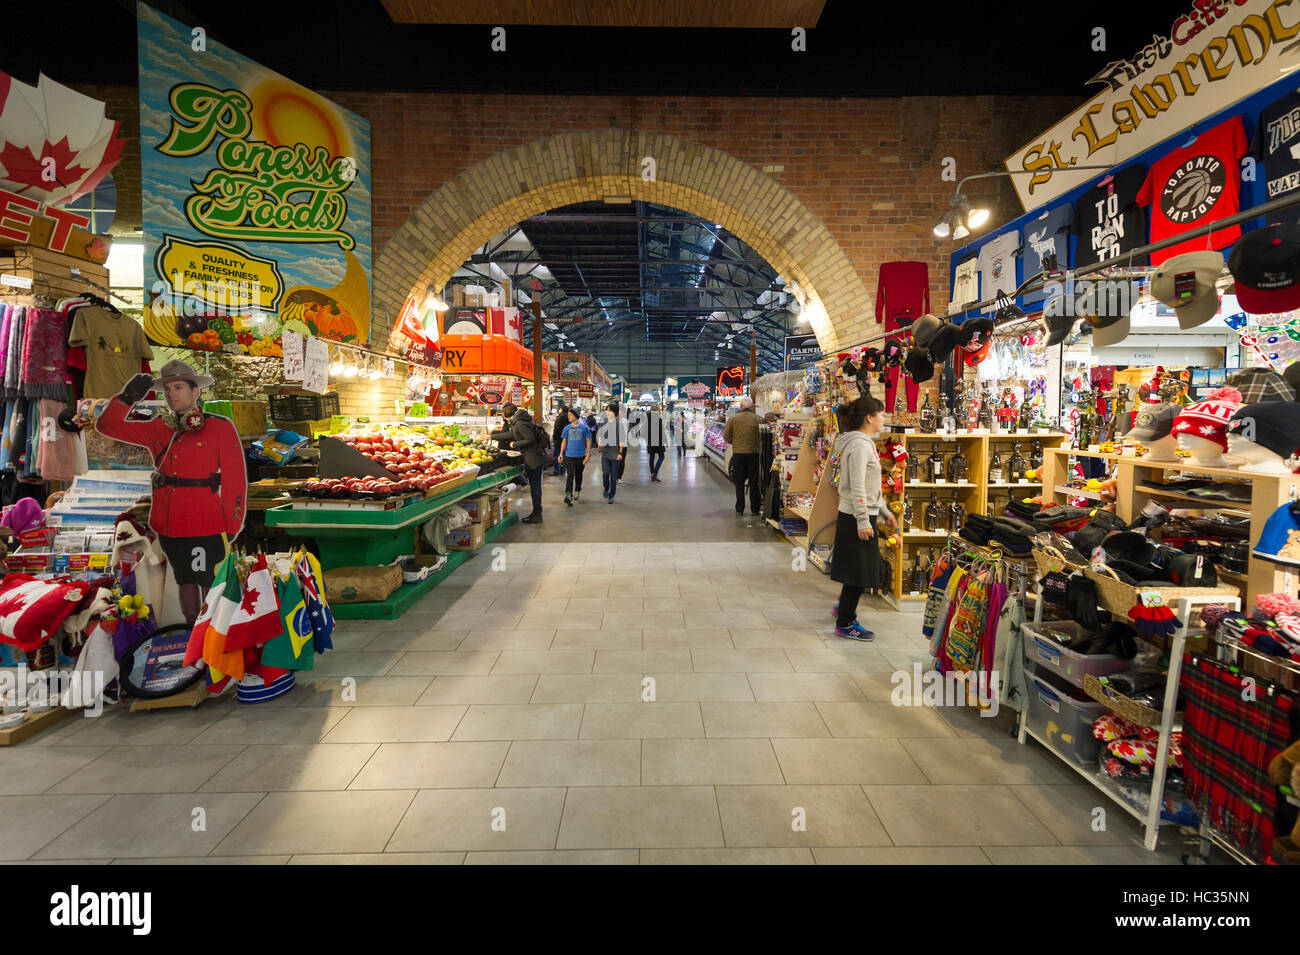 St. Lawrence market in Toronto Stock Photo